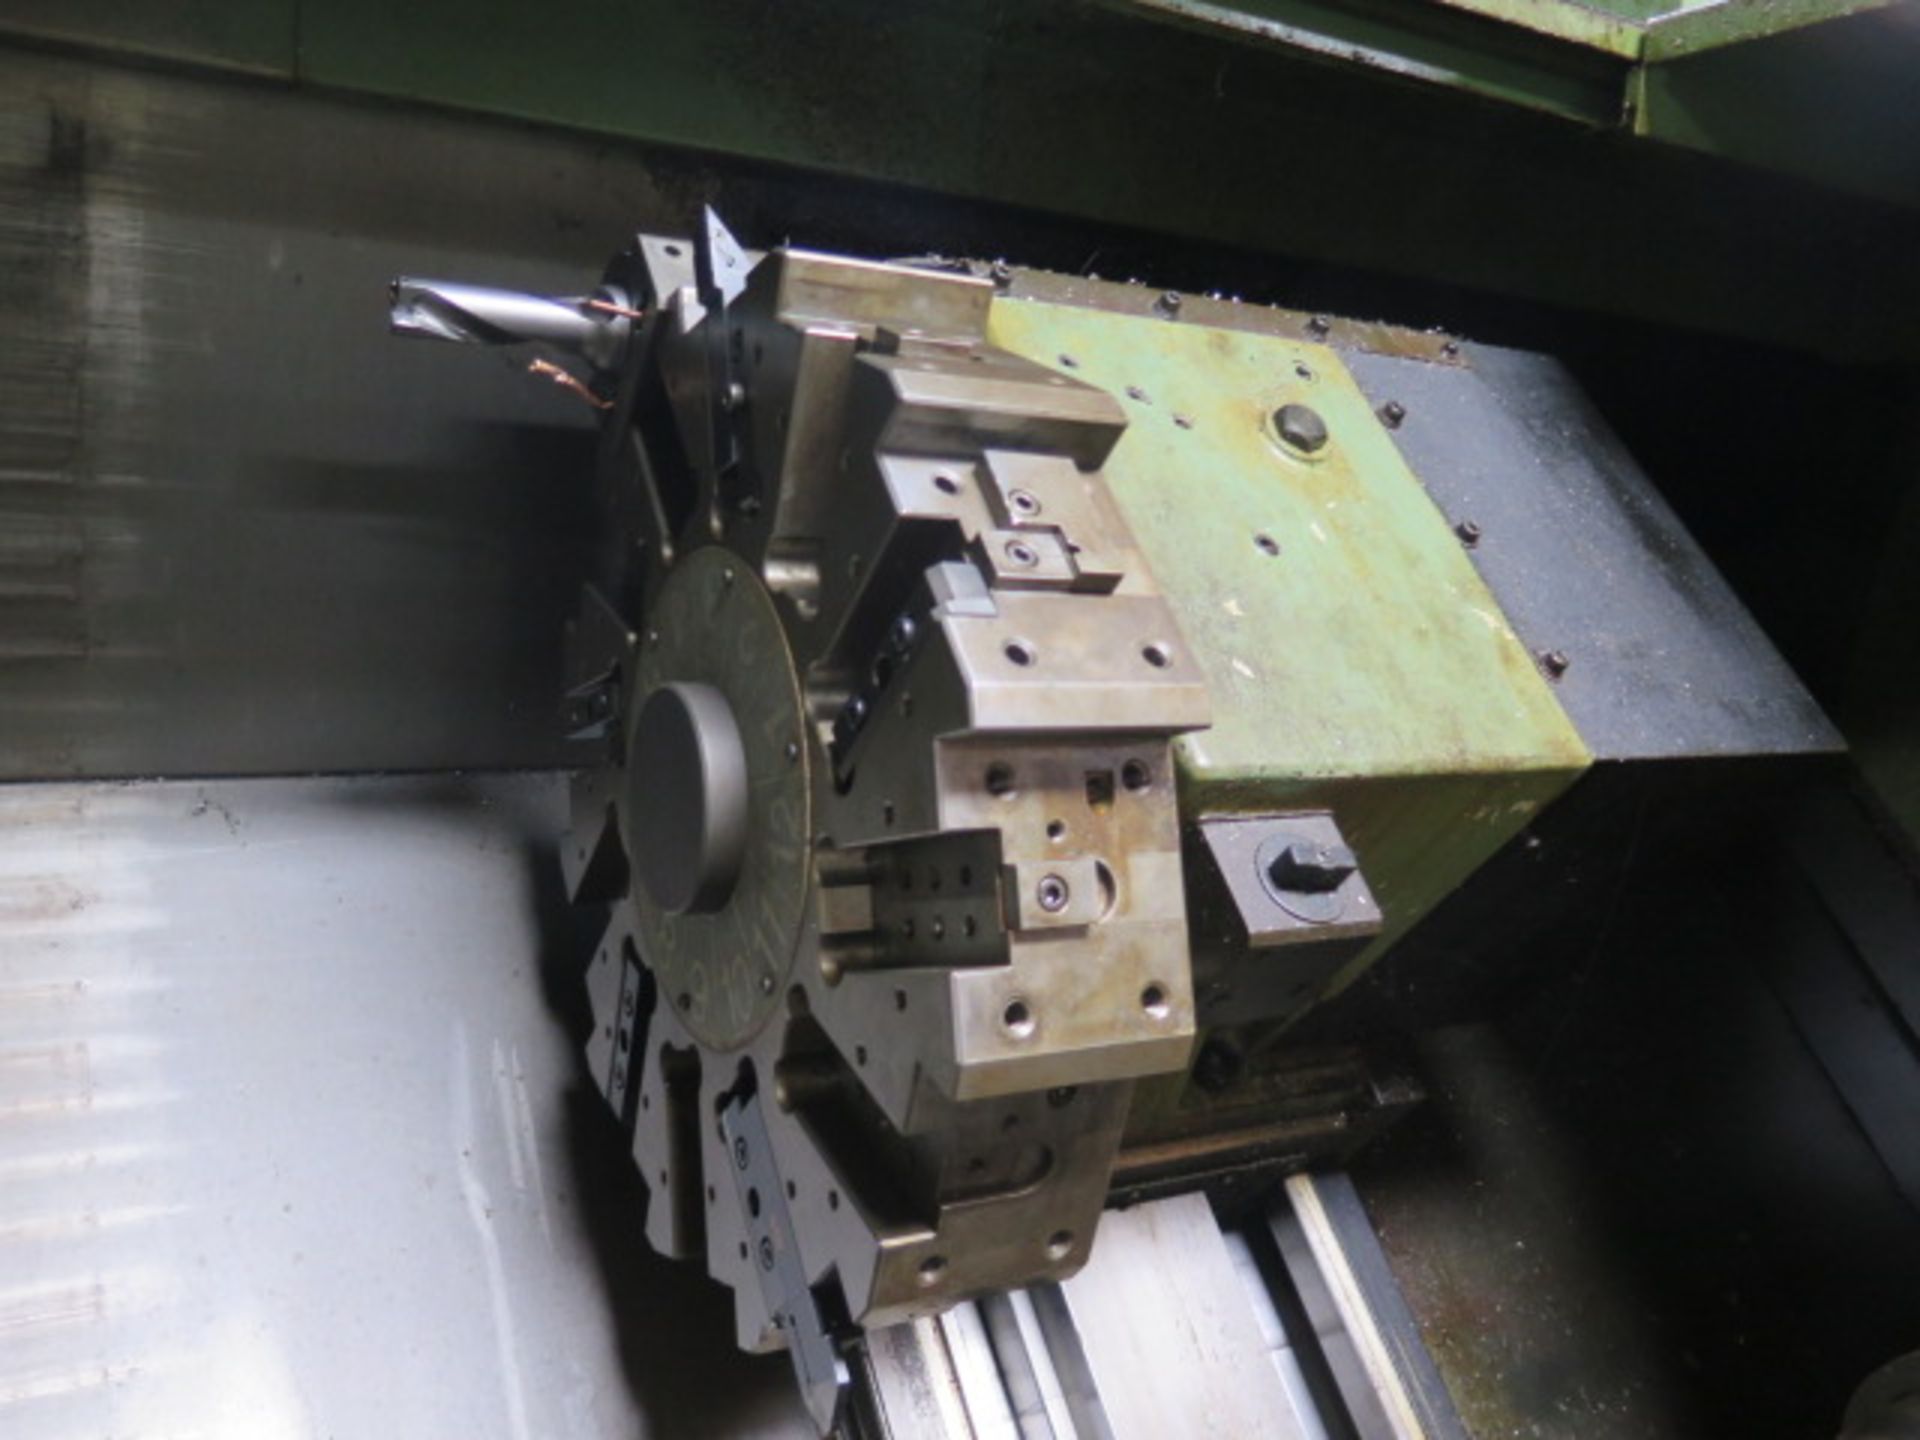 Mori Seiki SL-35A CNC Turning Center s/n 423 w/ Fanuc 10T Controls, 12-Station Turret, SOLD AS IS - Image 7 of 13